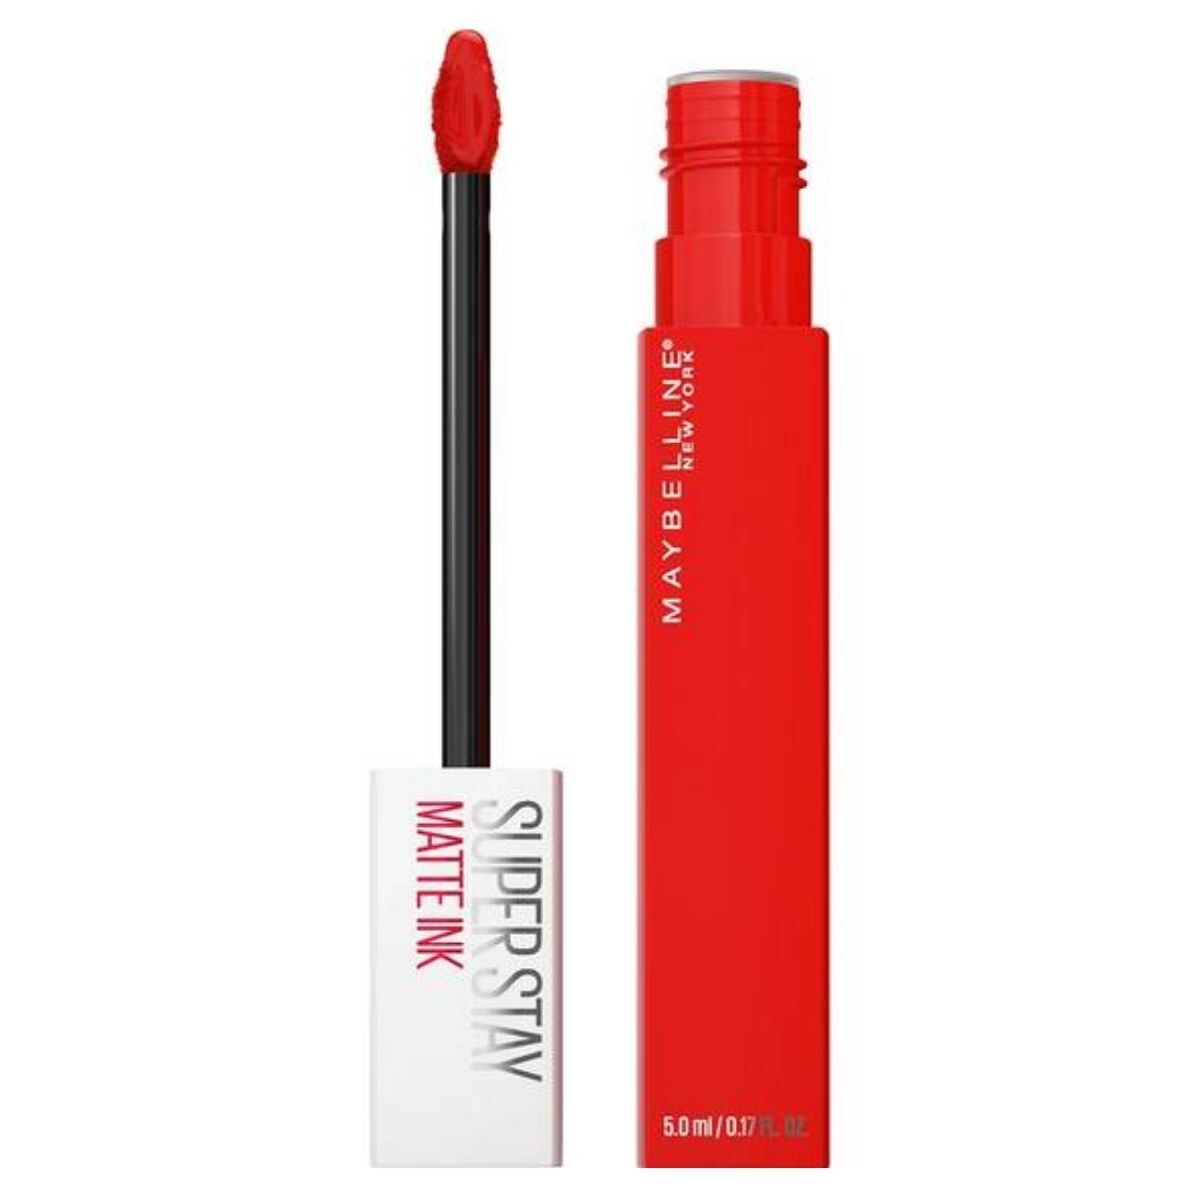 Labial Maybelline Super Stay Spice Edition - Individualist 320 